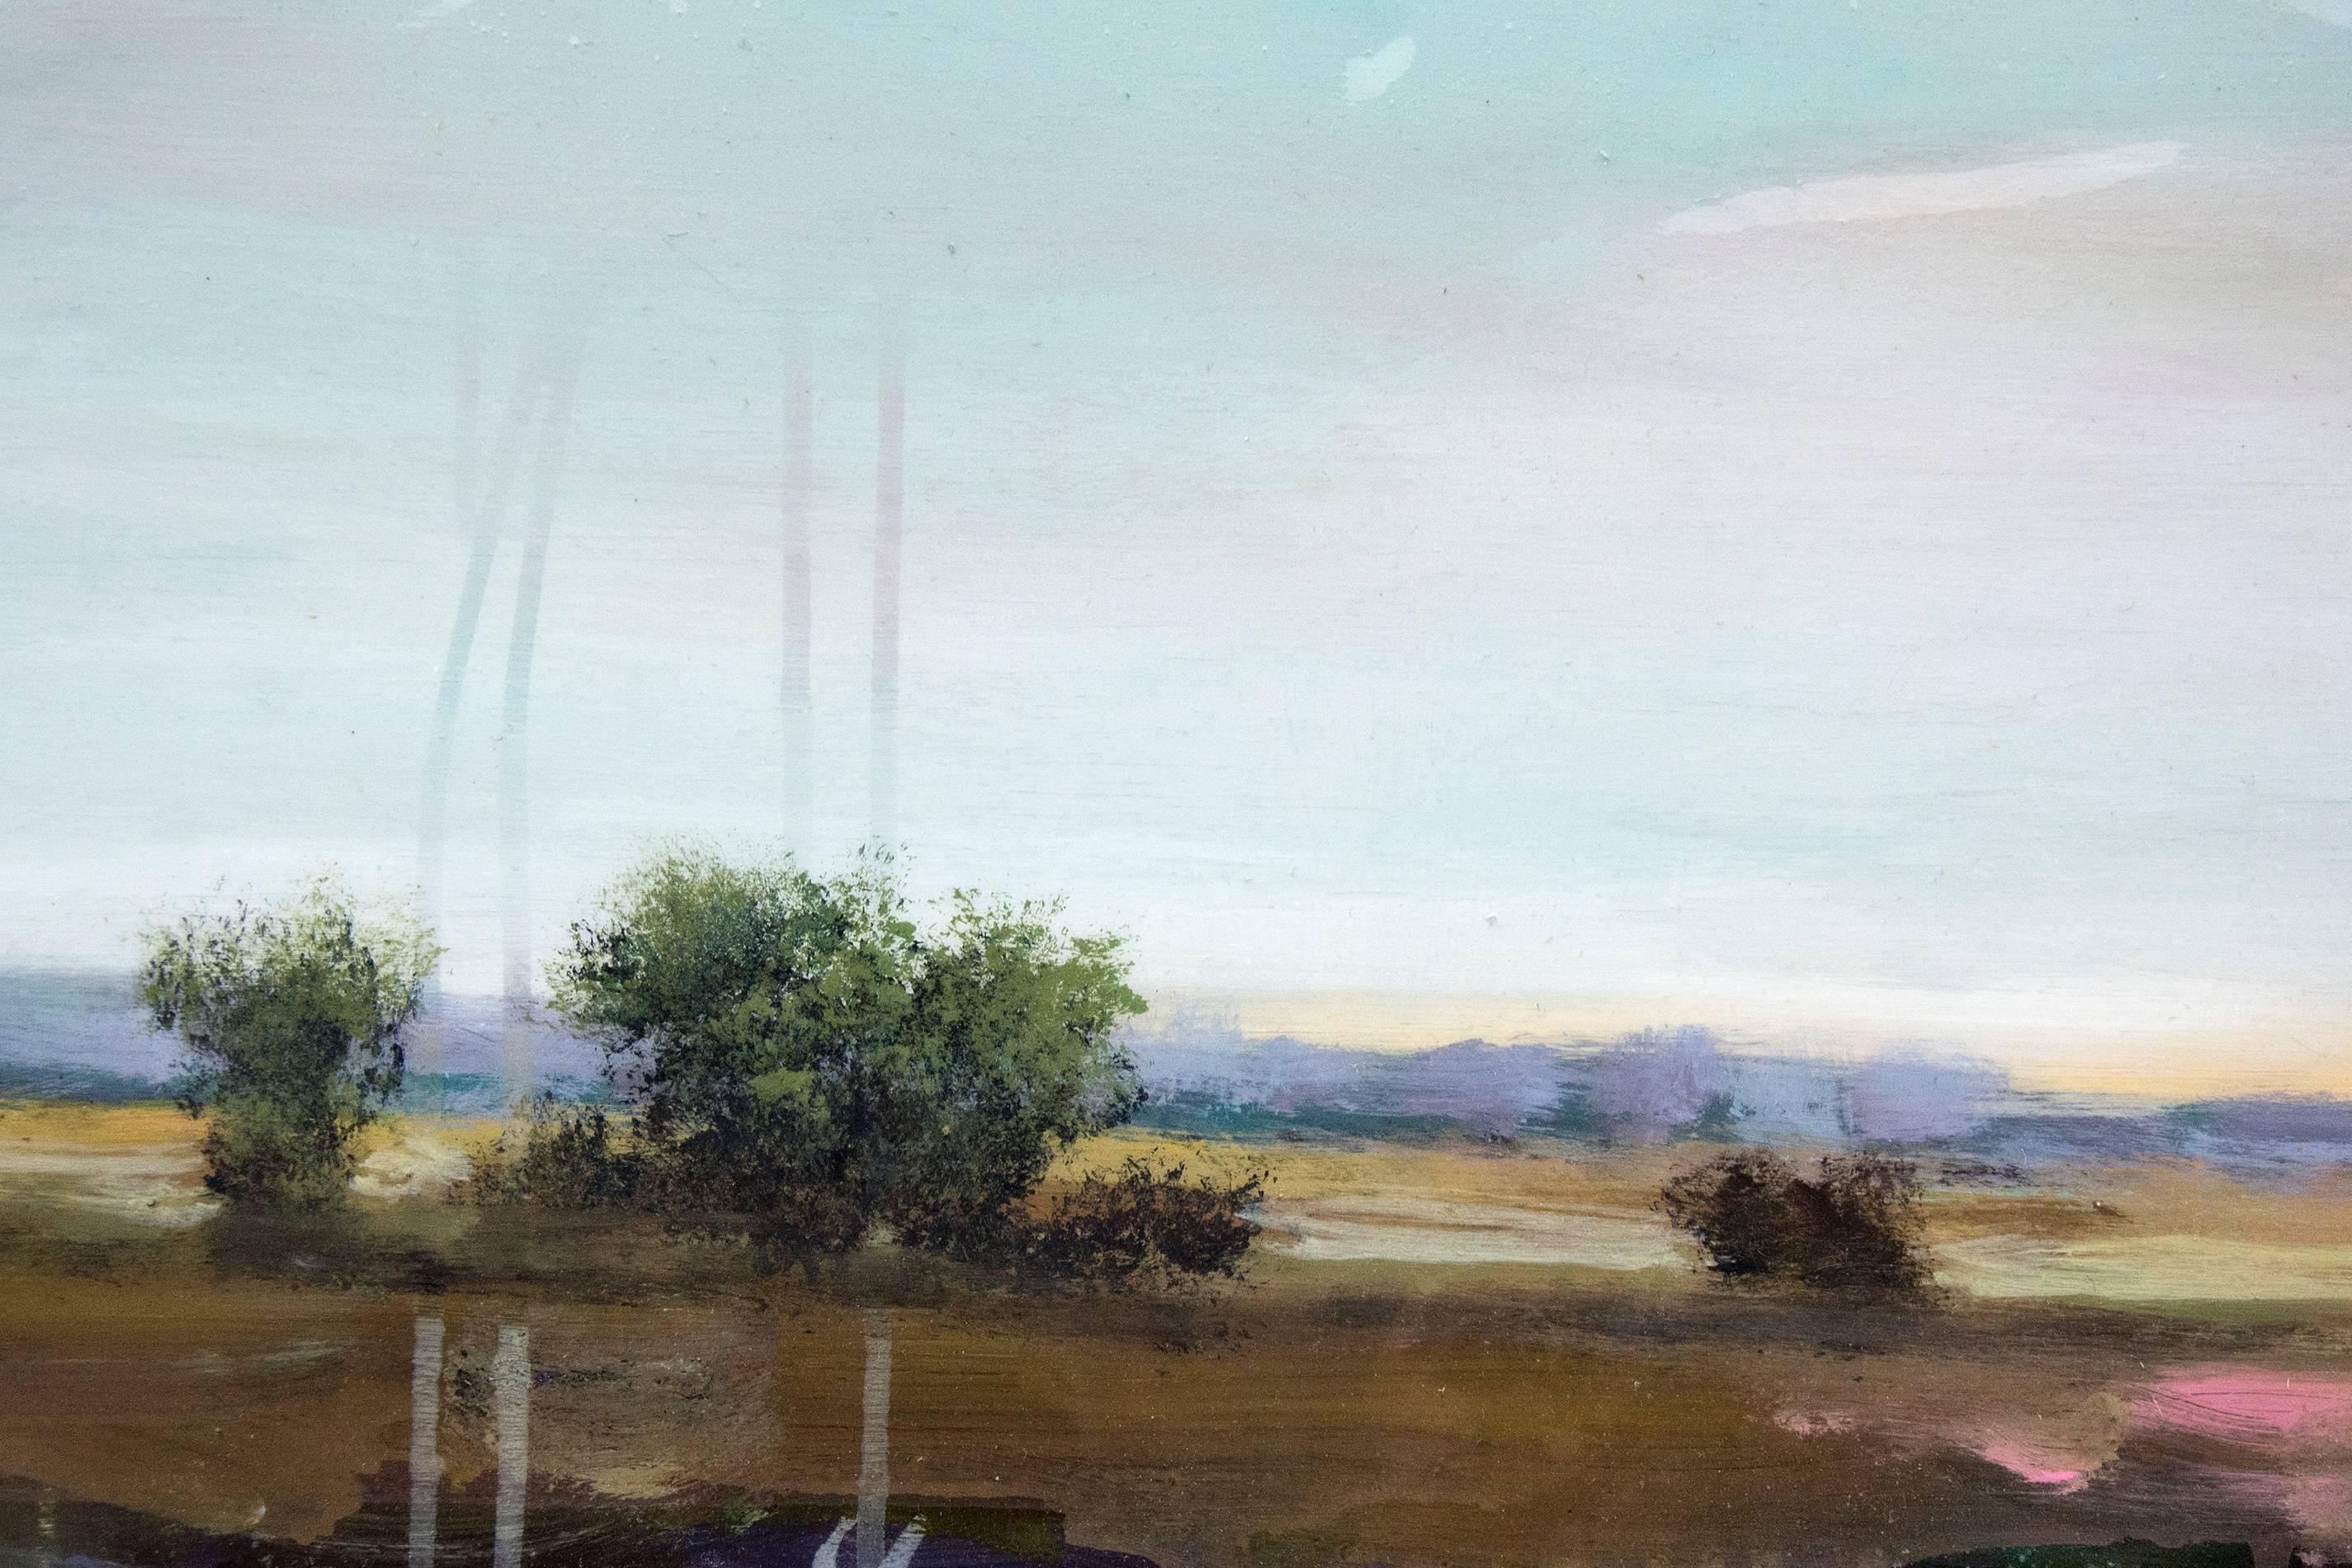 This is a new painting just arrived from the Berlin studio of acclaimed Canadian painter Peter Hoffer. A panoramic view of a sparse treed landscape displayed on a colorful sky backdrop boasting hues of lavender and blues. The painting has a